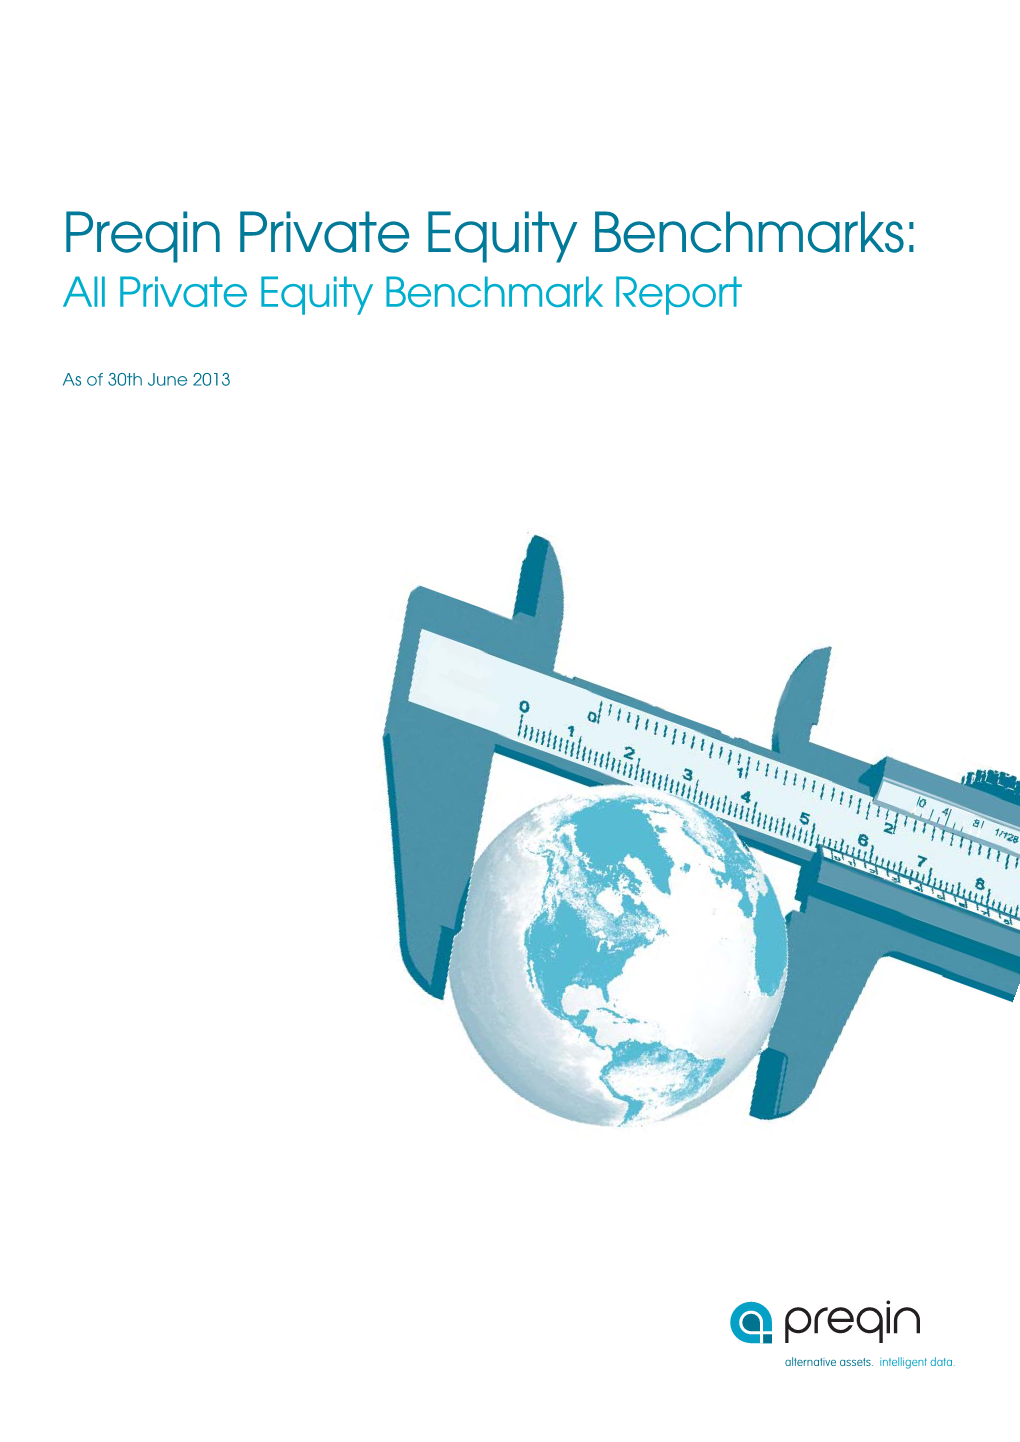 Q2 2013 Preqin Private Equity Benchmarks: All Private Equity Benchmark Report